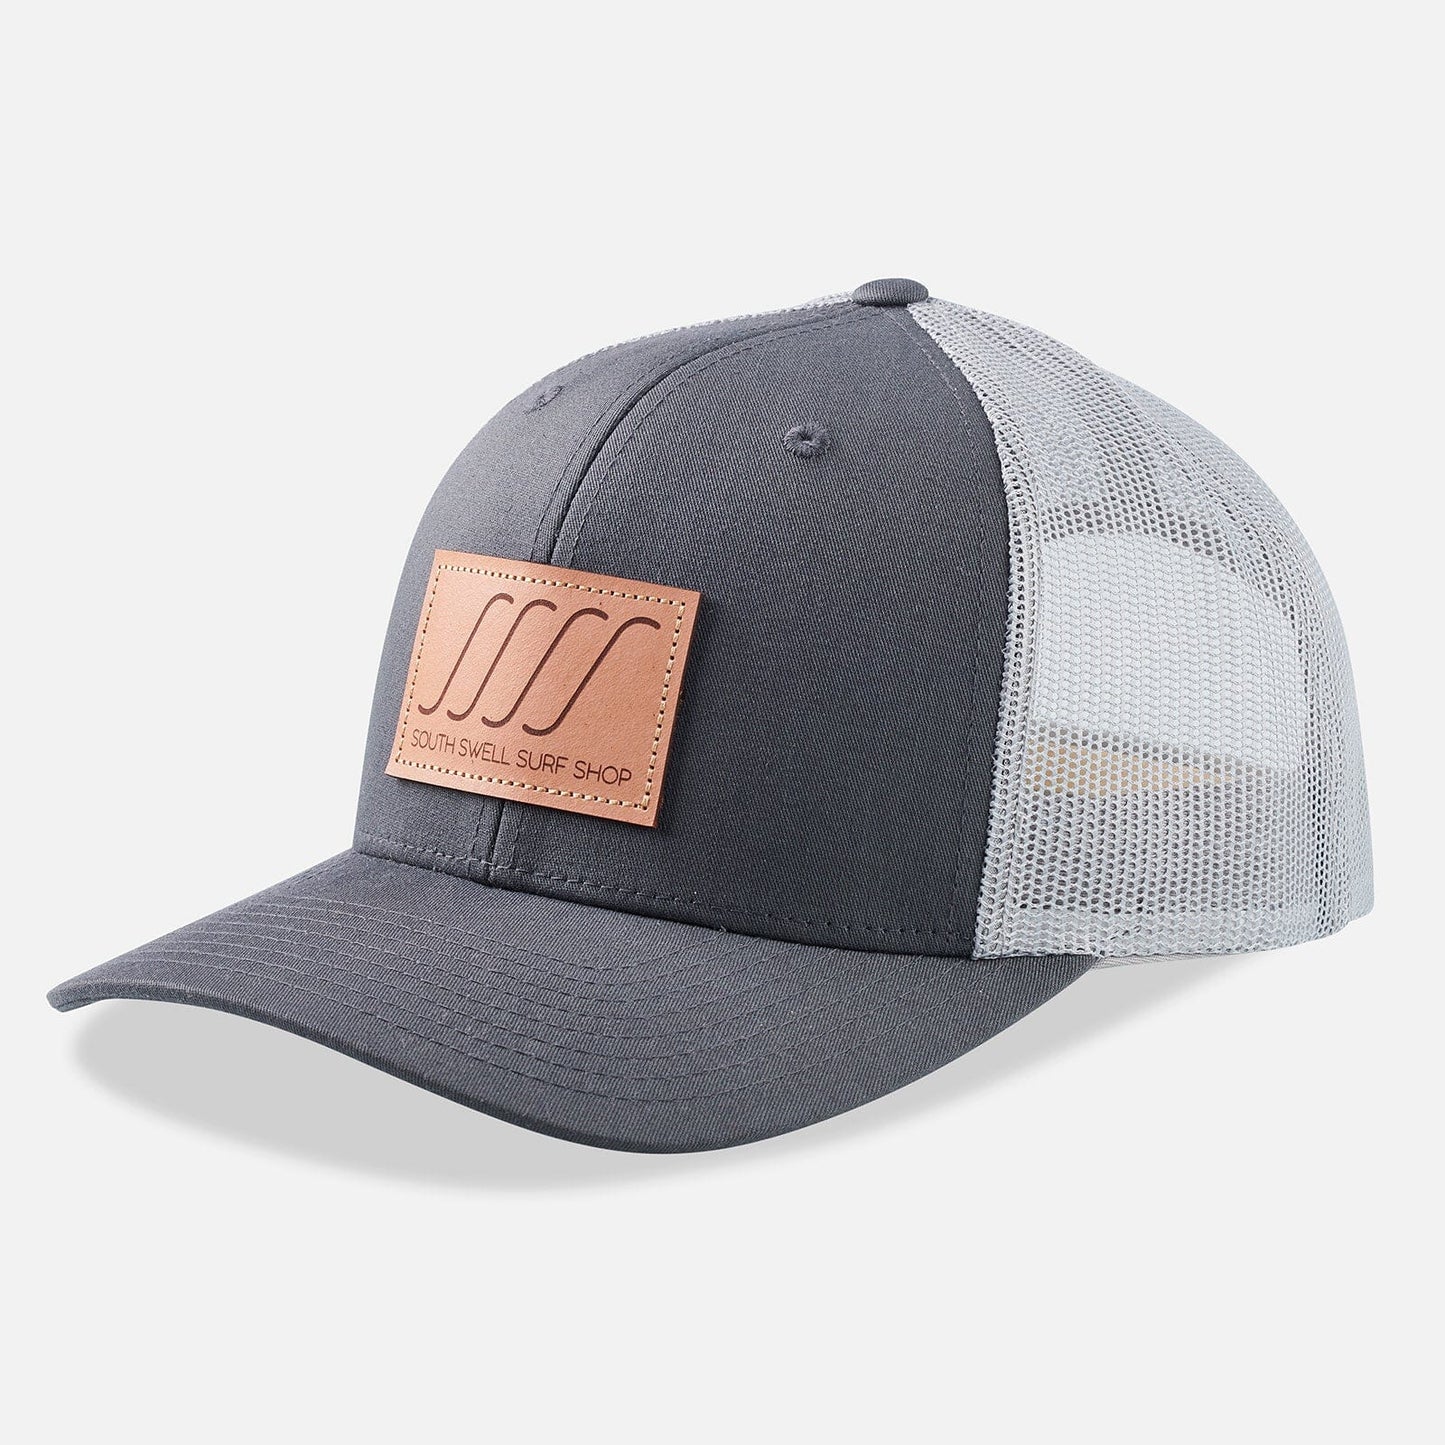 South Swell Leather Patch Trucker Hat Hats SOUTH SWELL Charcoal 